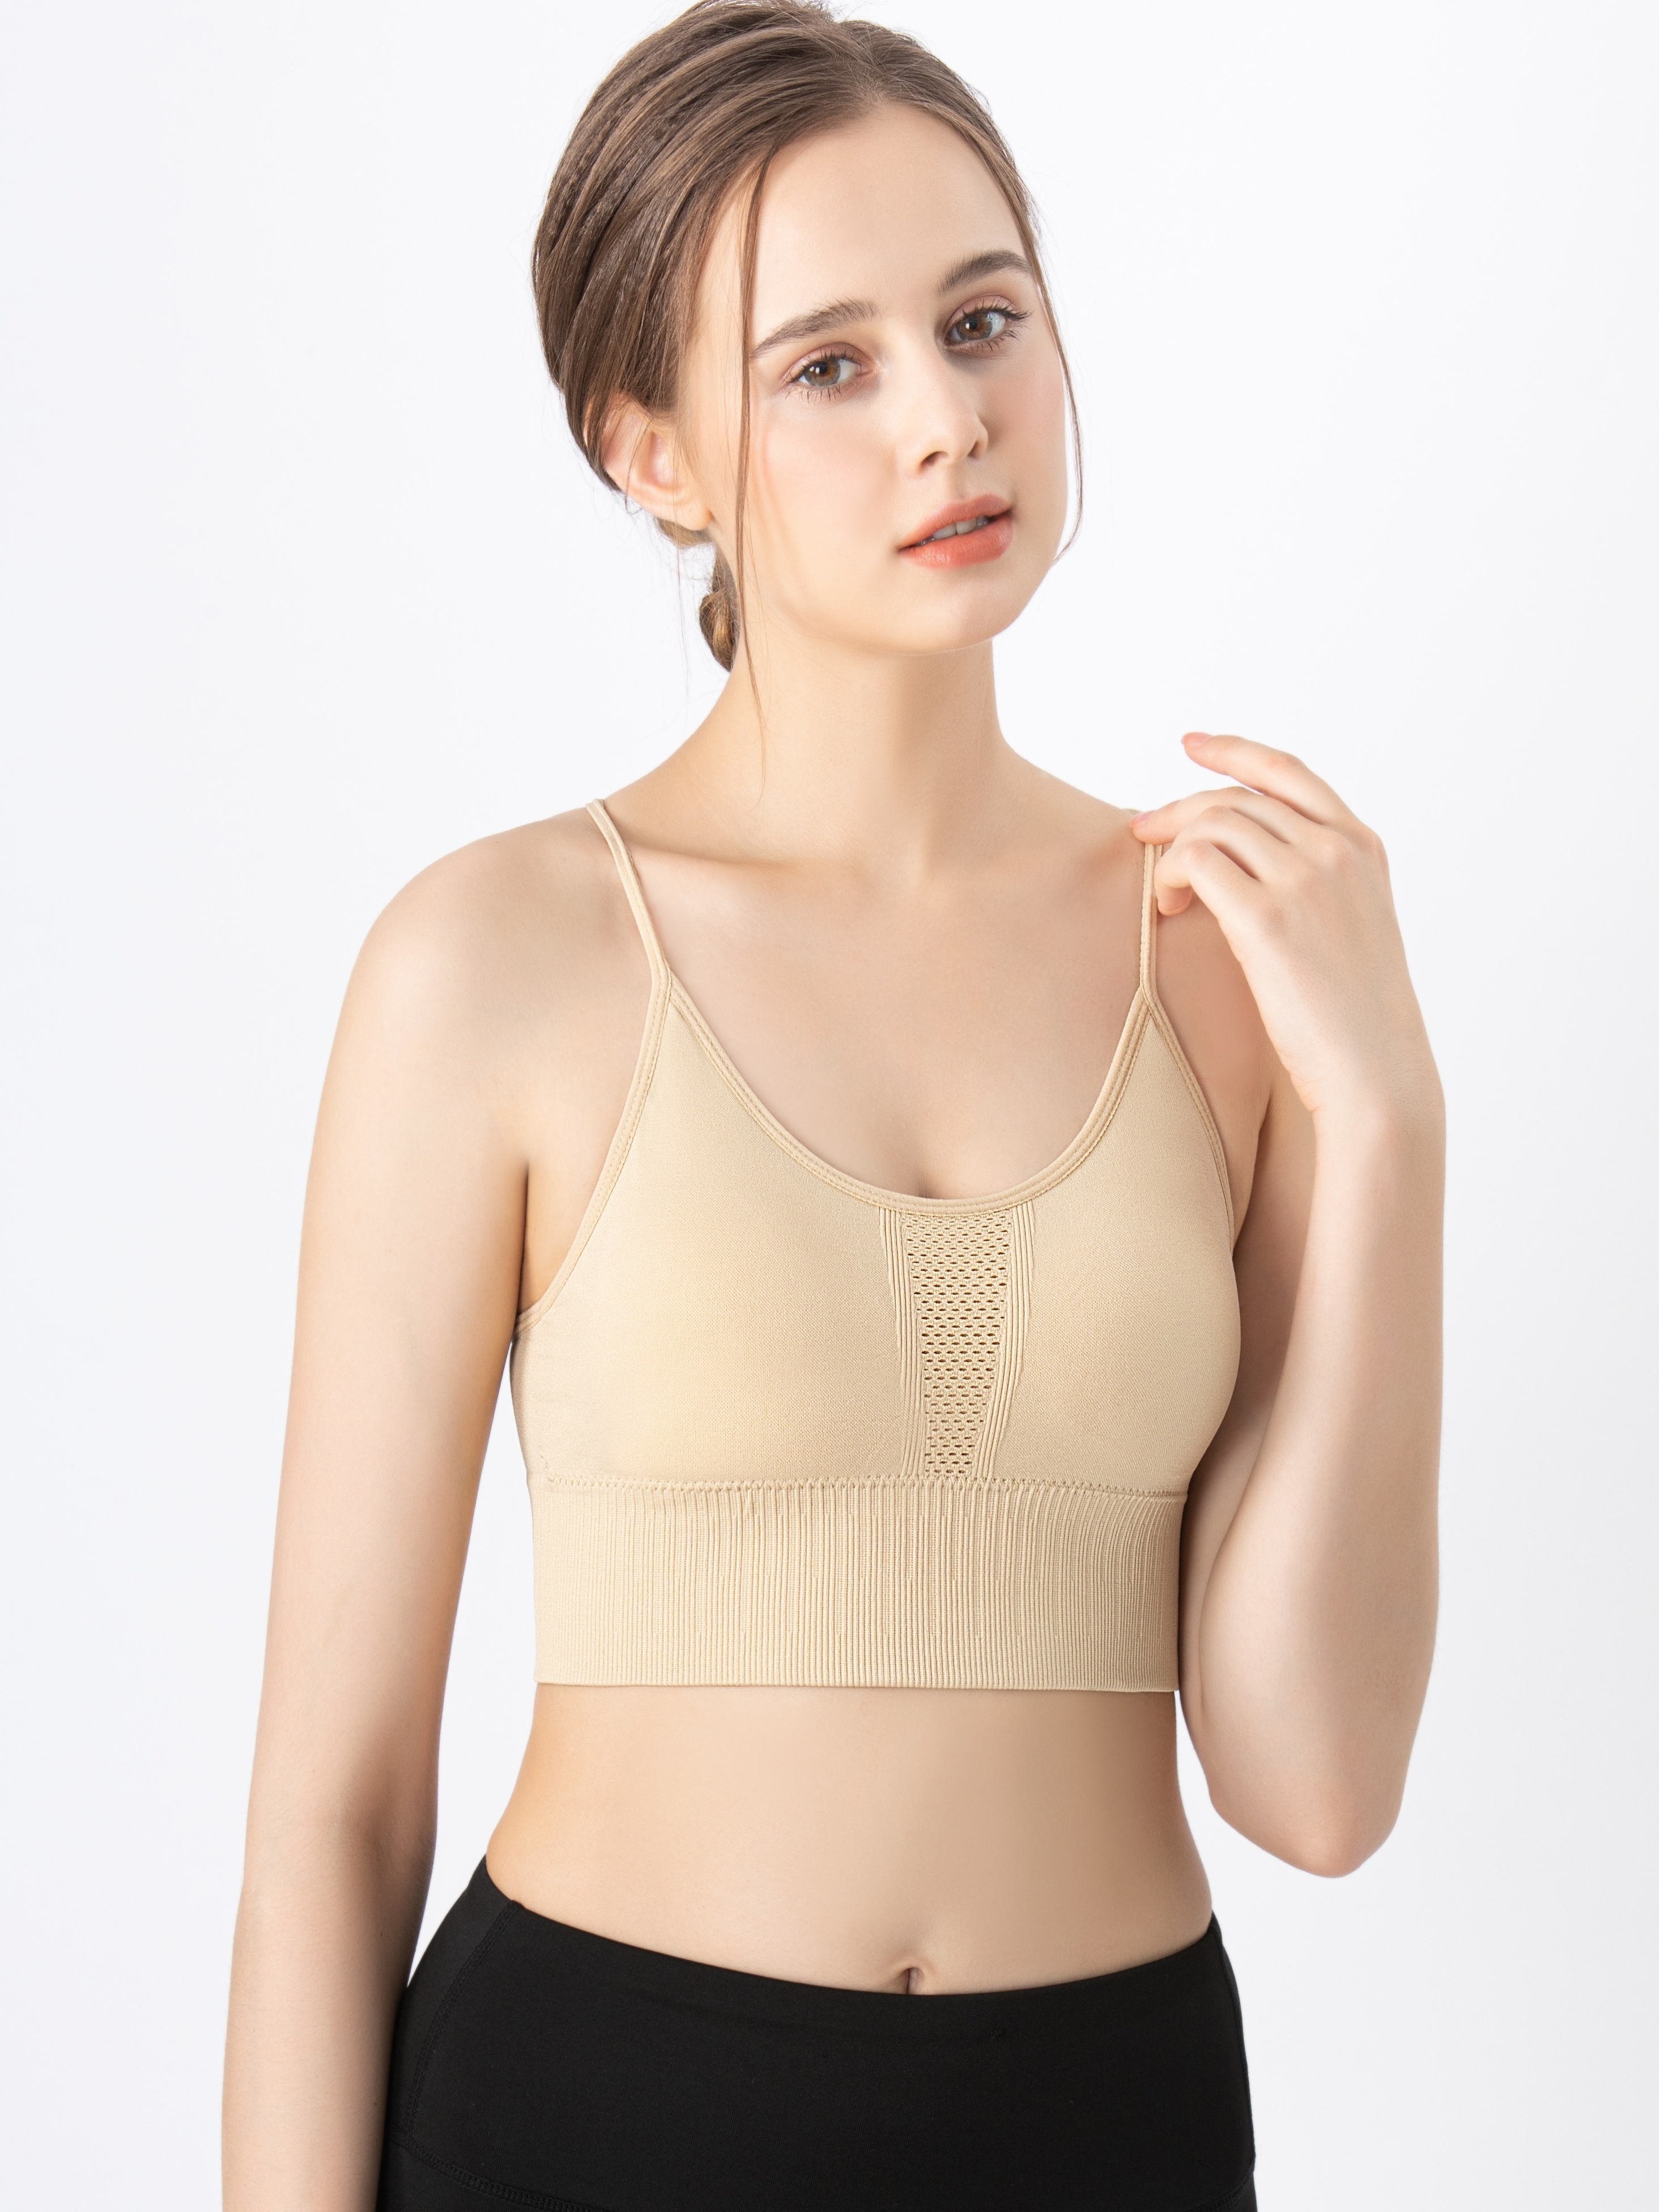 Breathable Criss Cross Gym Top For Women Backless, Seamless 40h Sports Bra  With Push Up Feature J230529 From Baofu003, $10.94